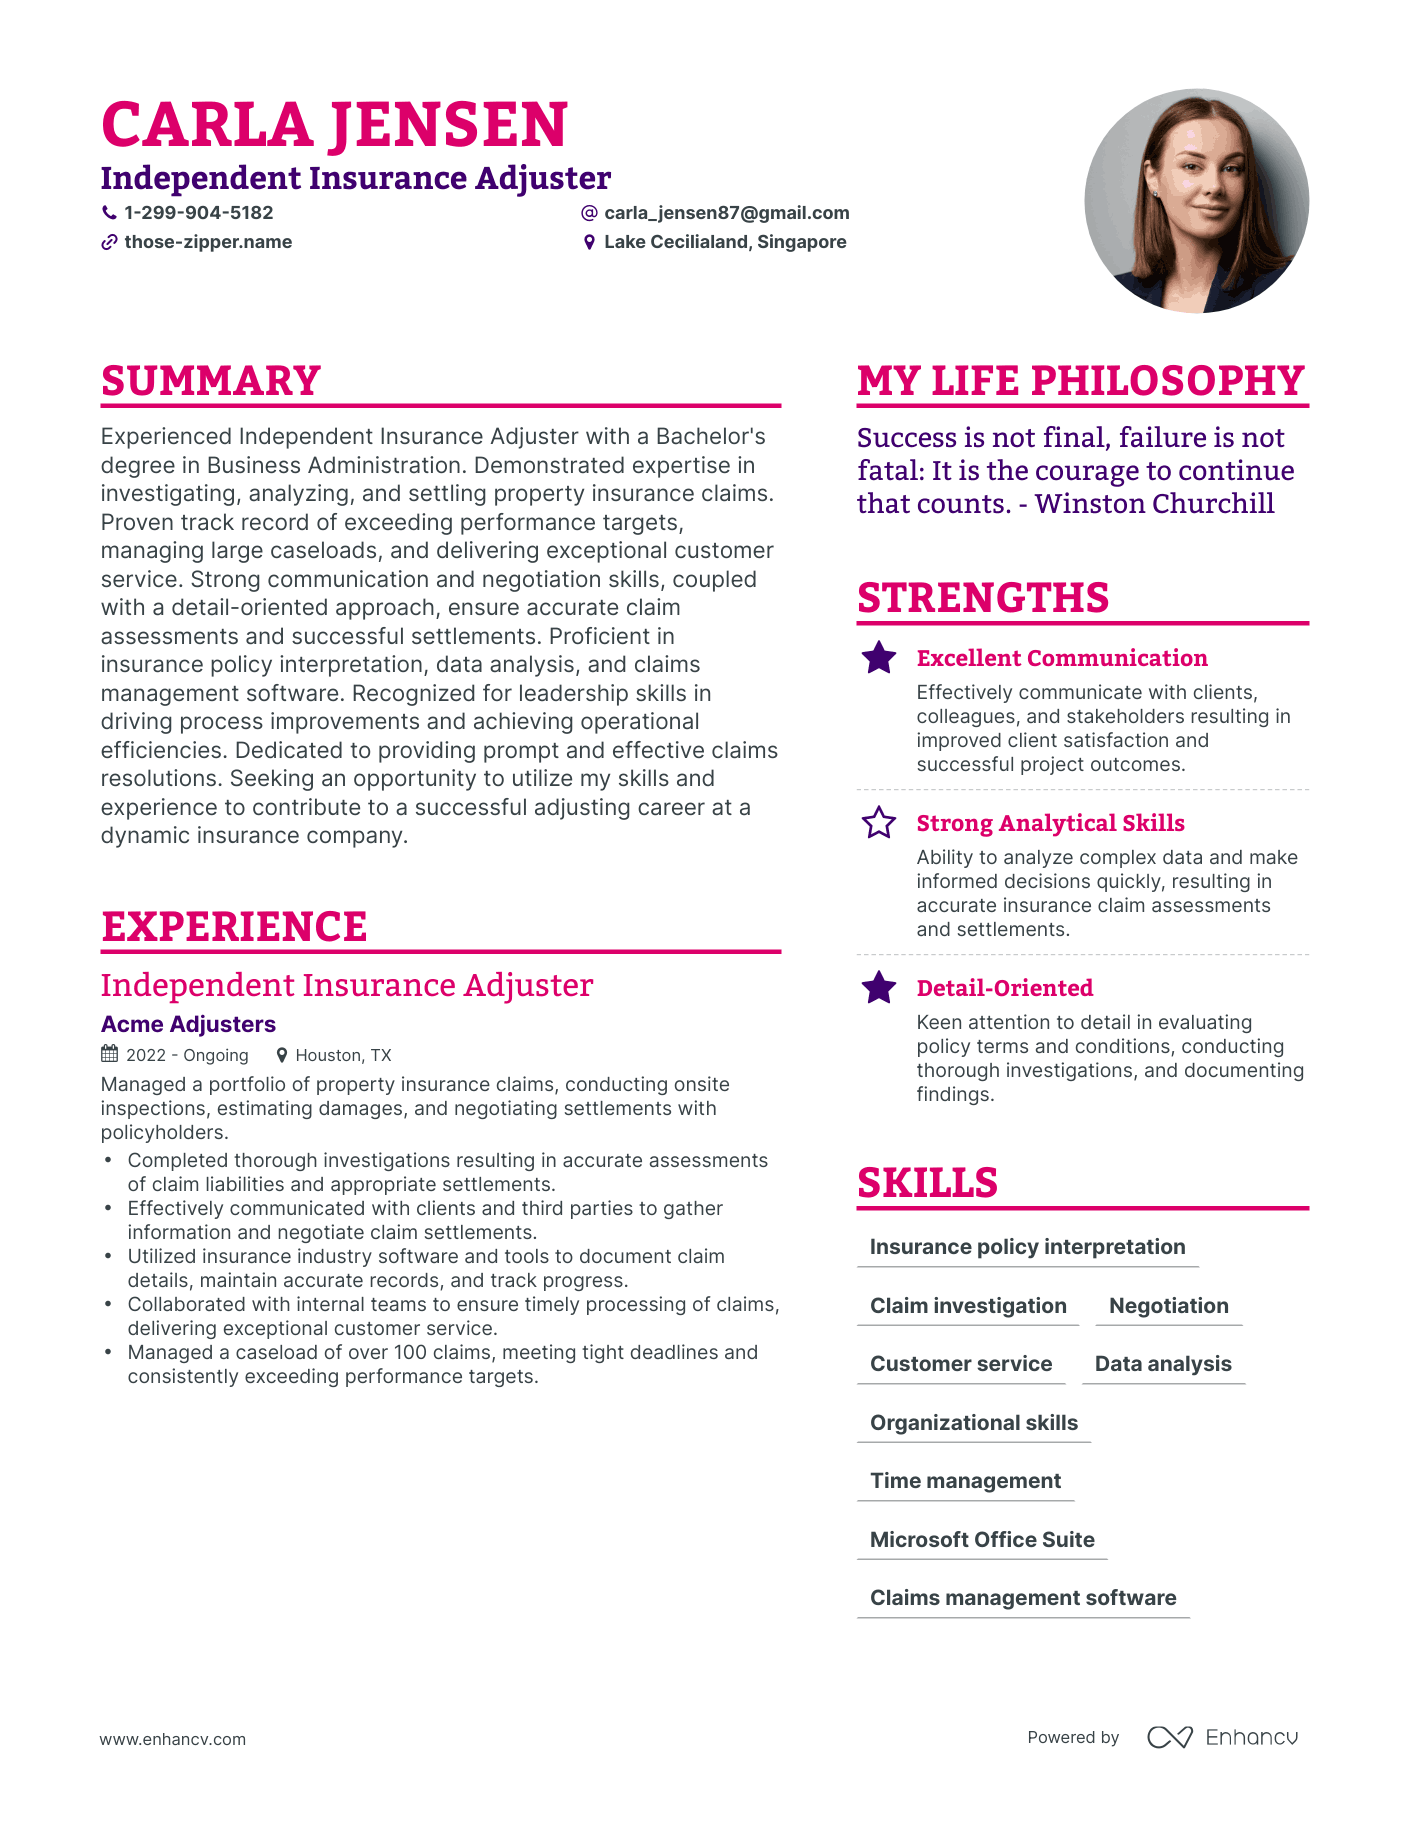 Independent Insurance Adjuster resume example